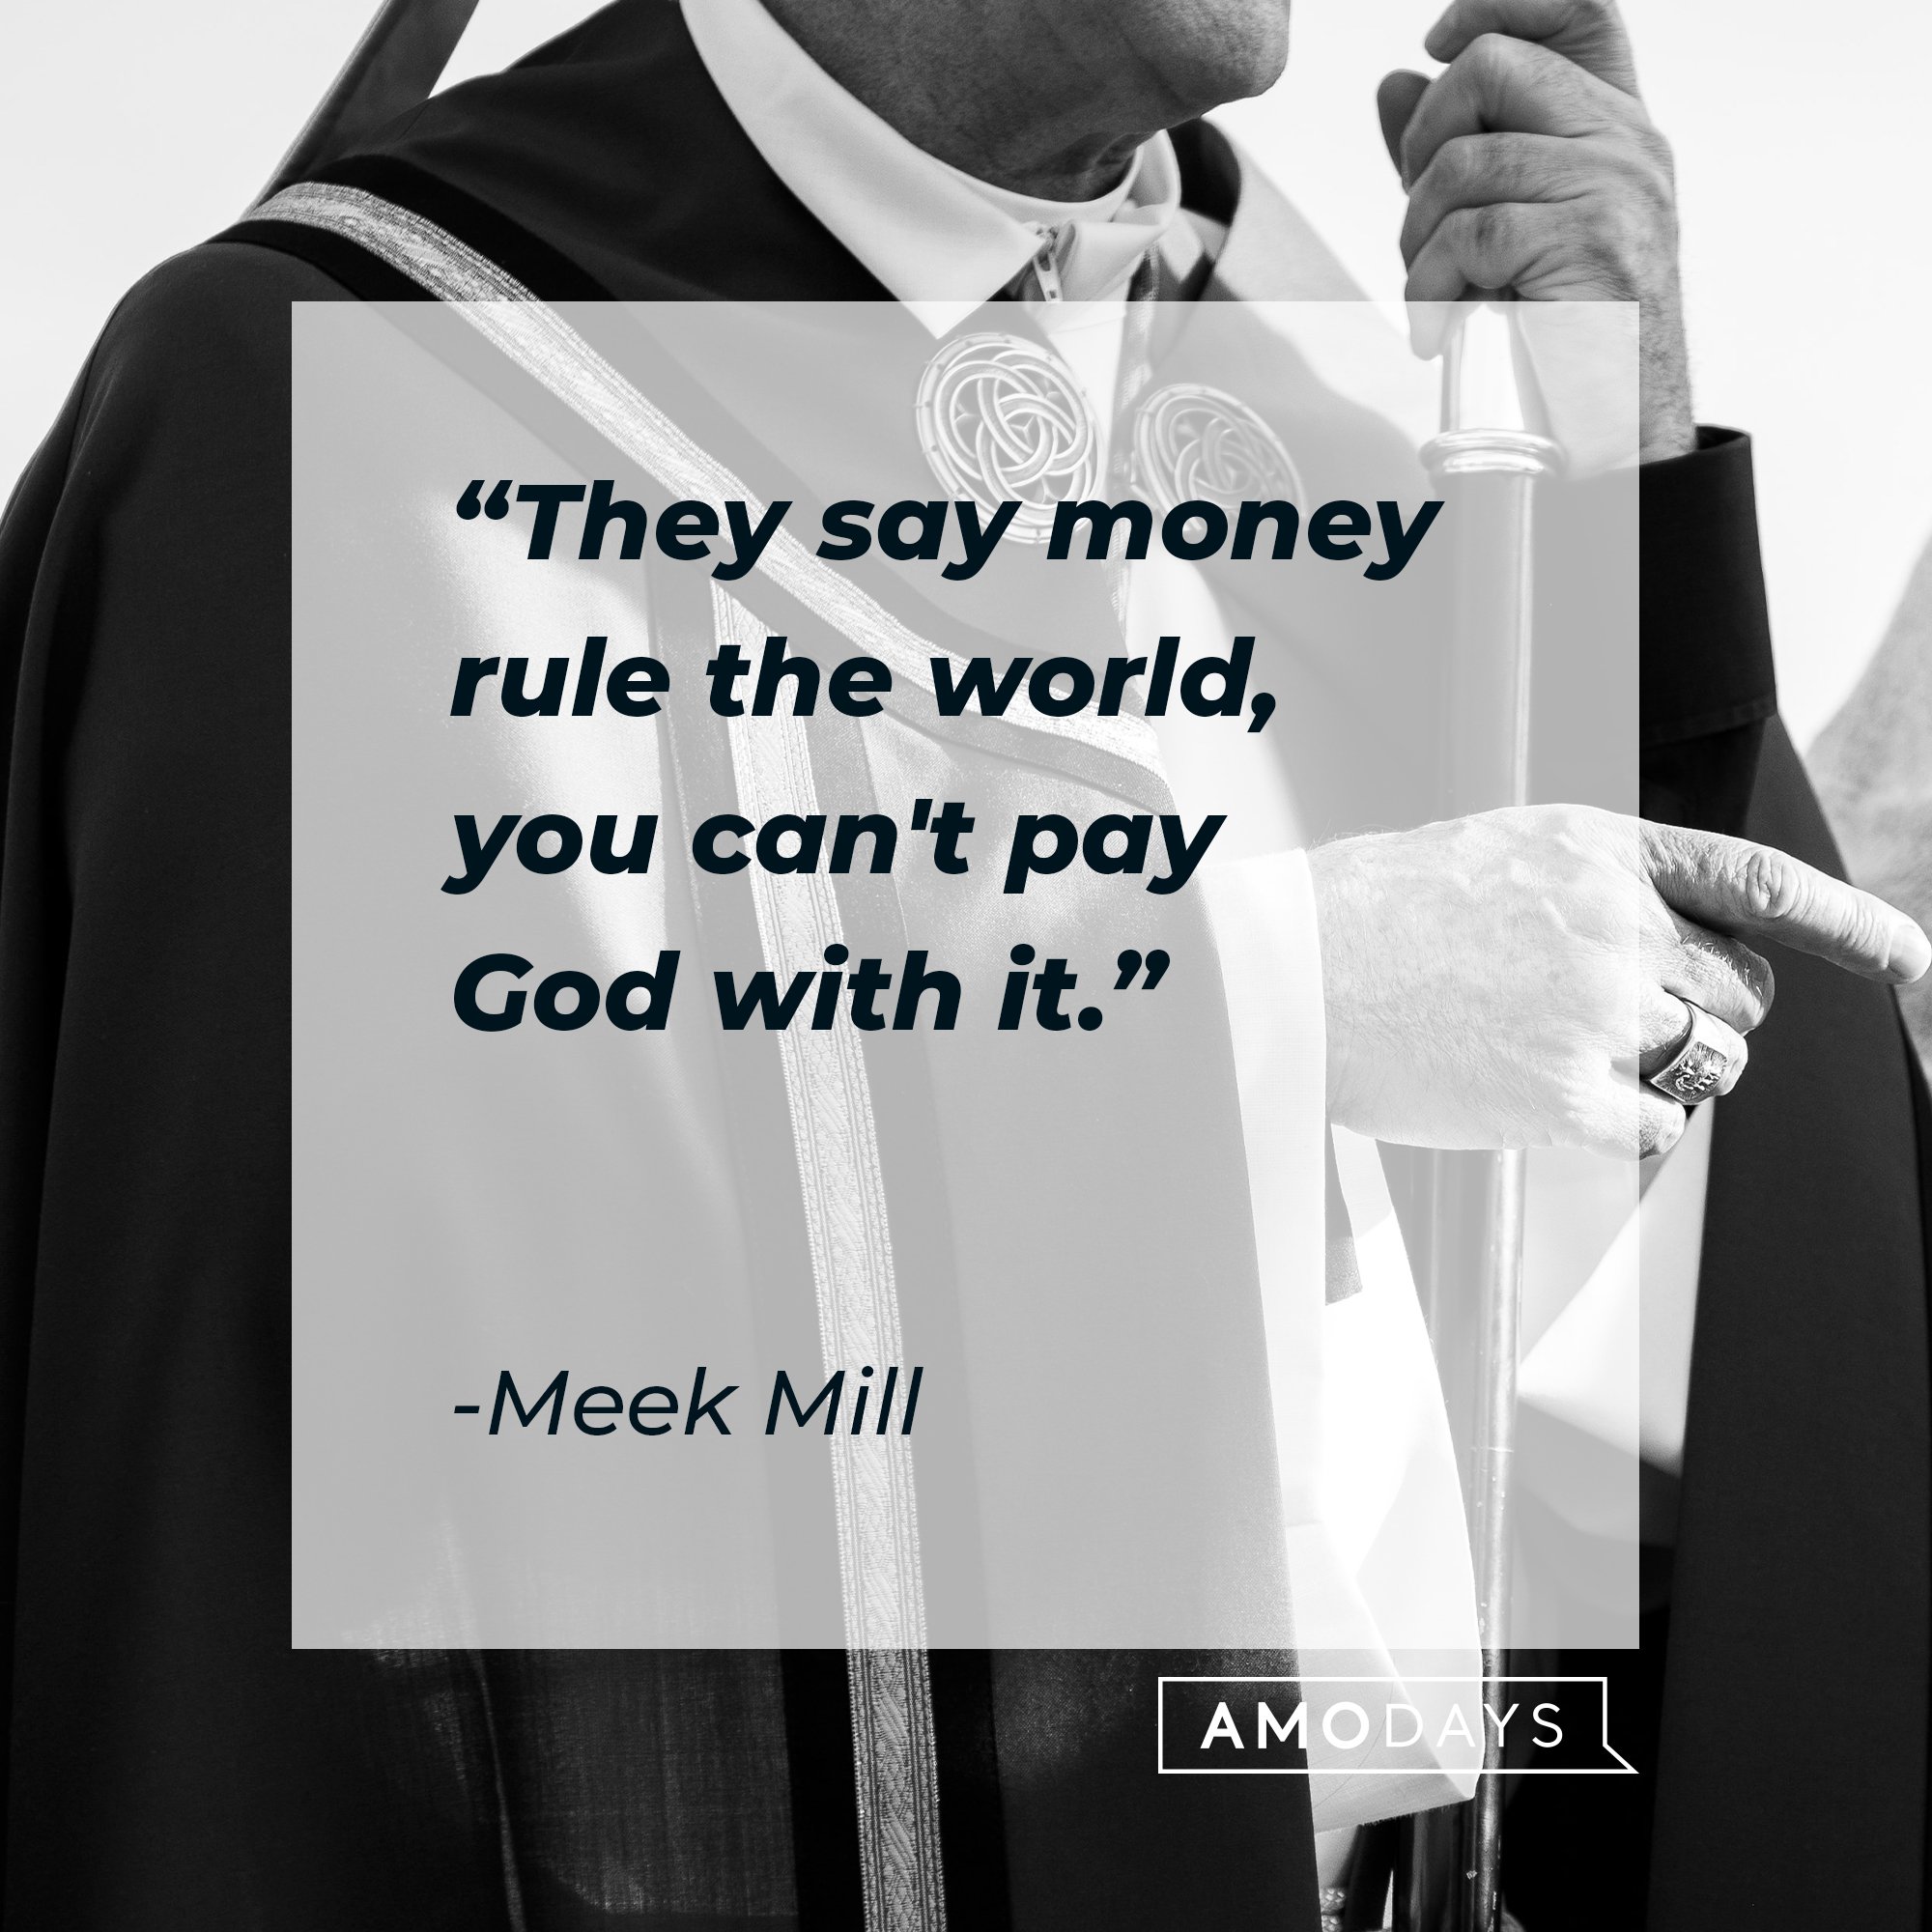 Meek Mill’s quote: "They say money rule the world, you can't pay God with it." | Image: AmoDays 